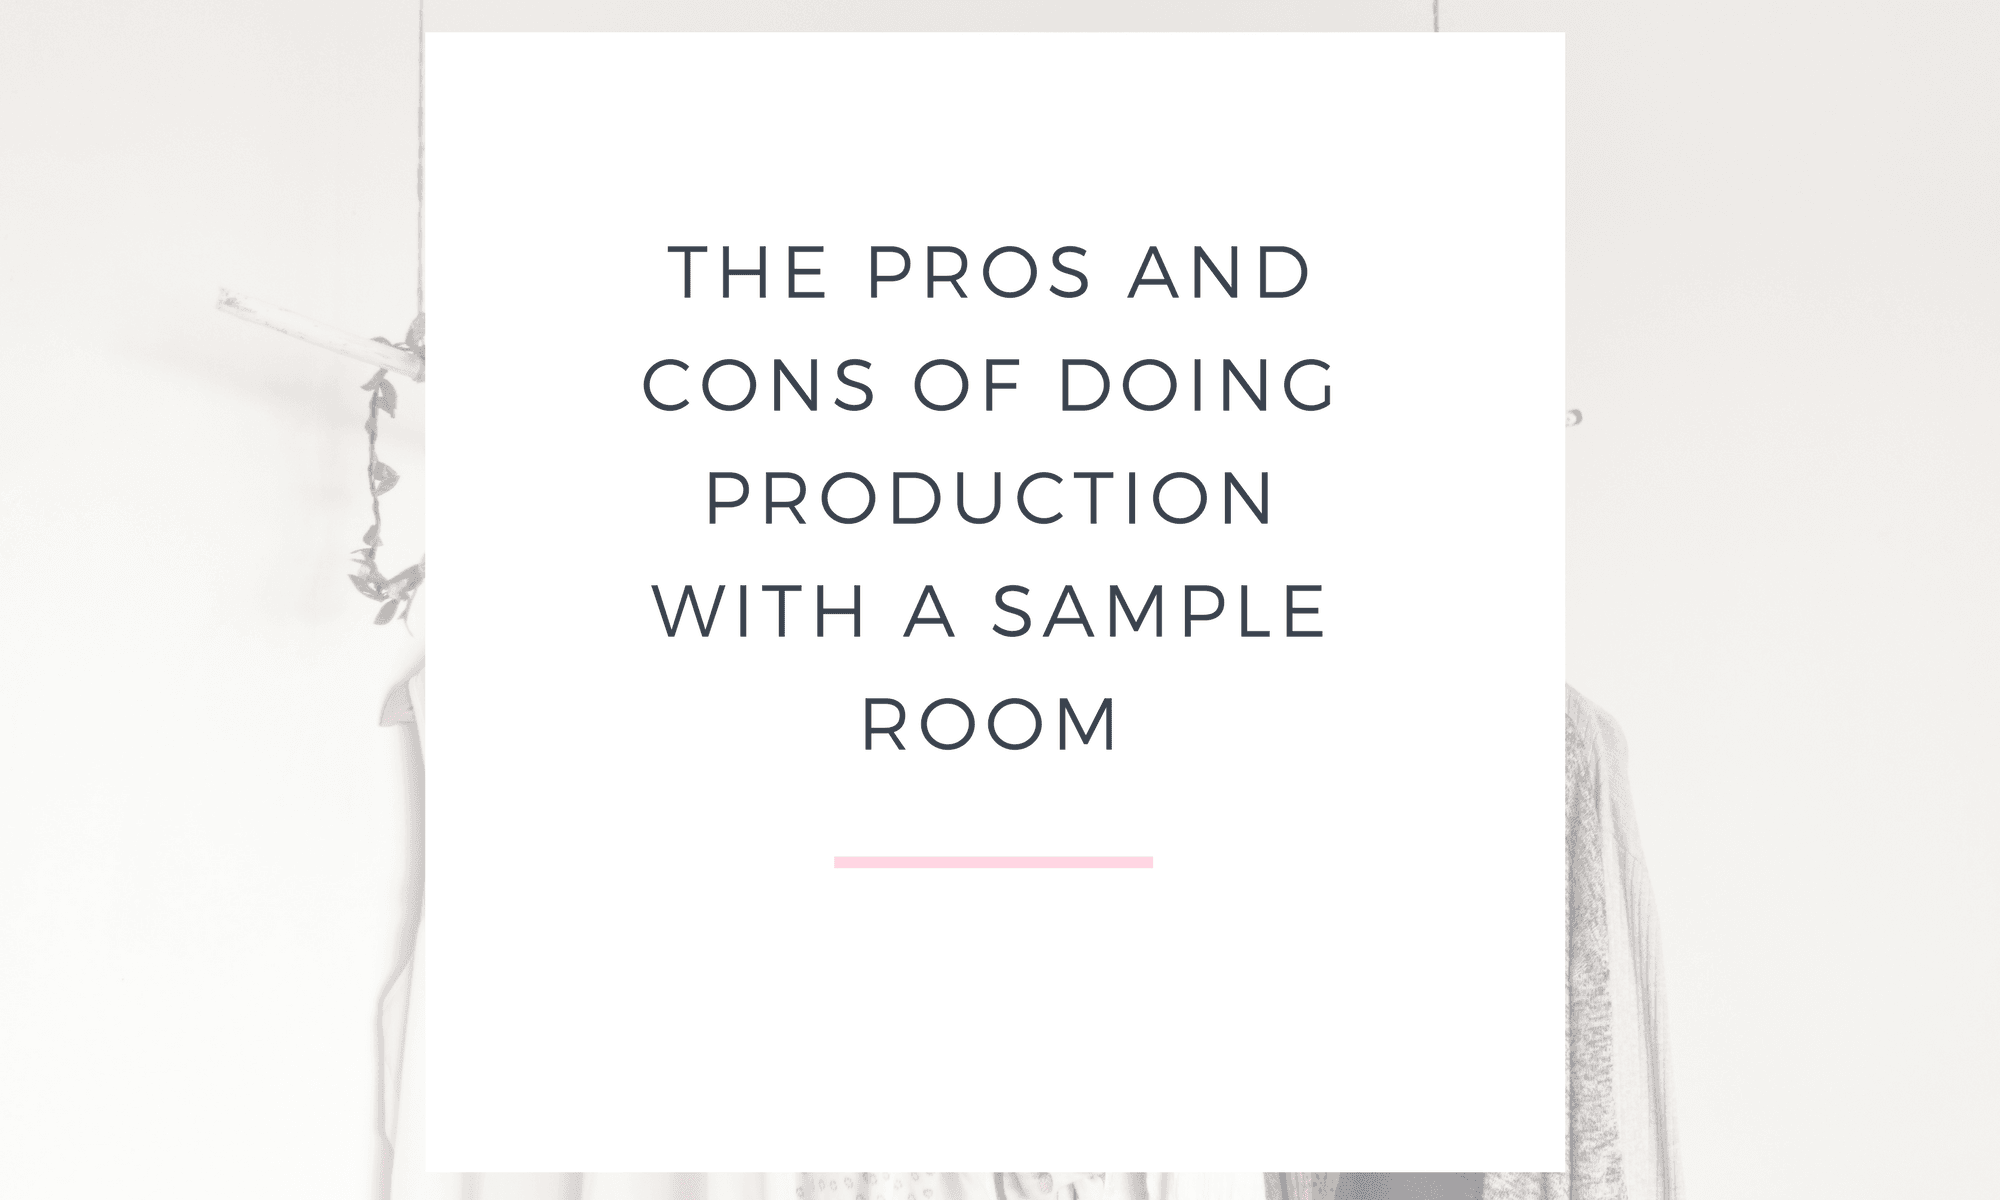 THE PROS AND CONS OF DOING PRODUCTION WITH A SAMPLE ROOM